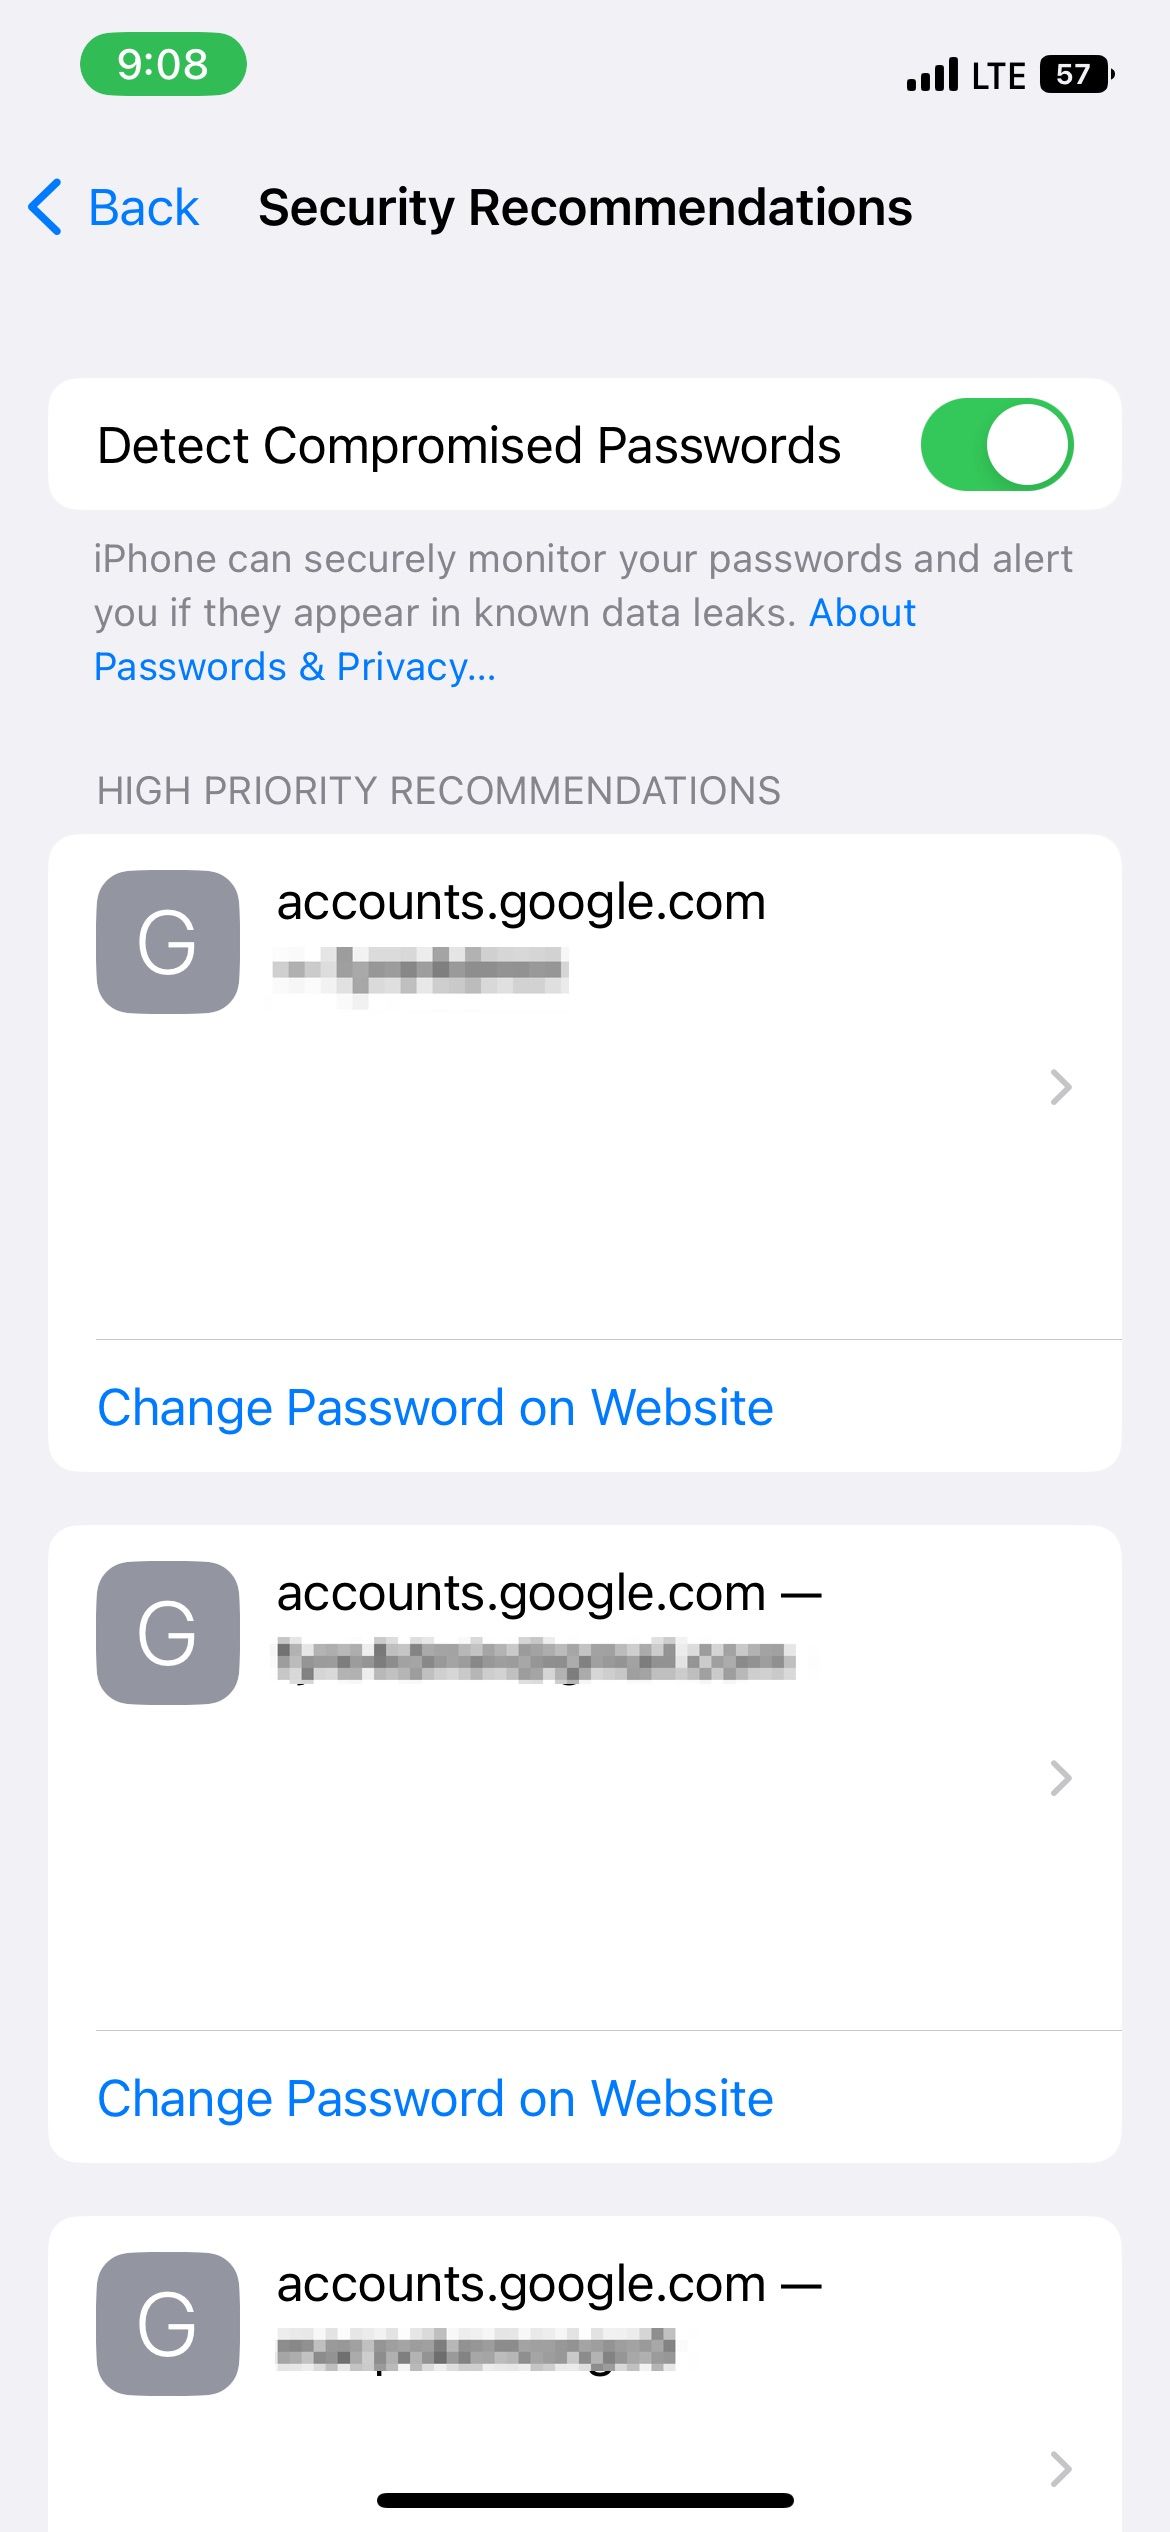 iCloud Keychain Security Recommendations on iPhone